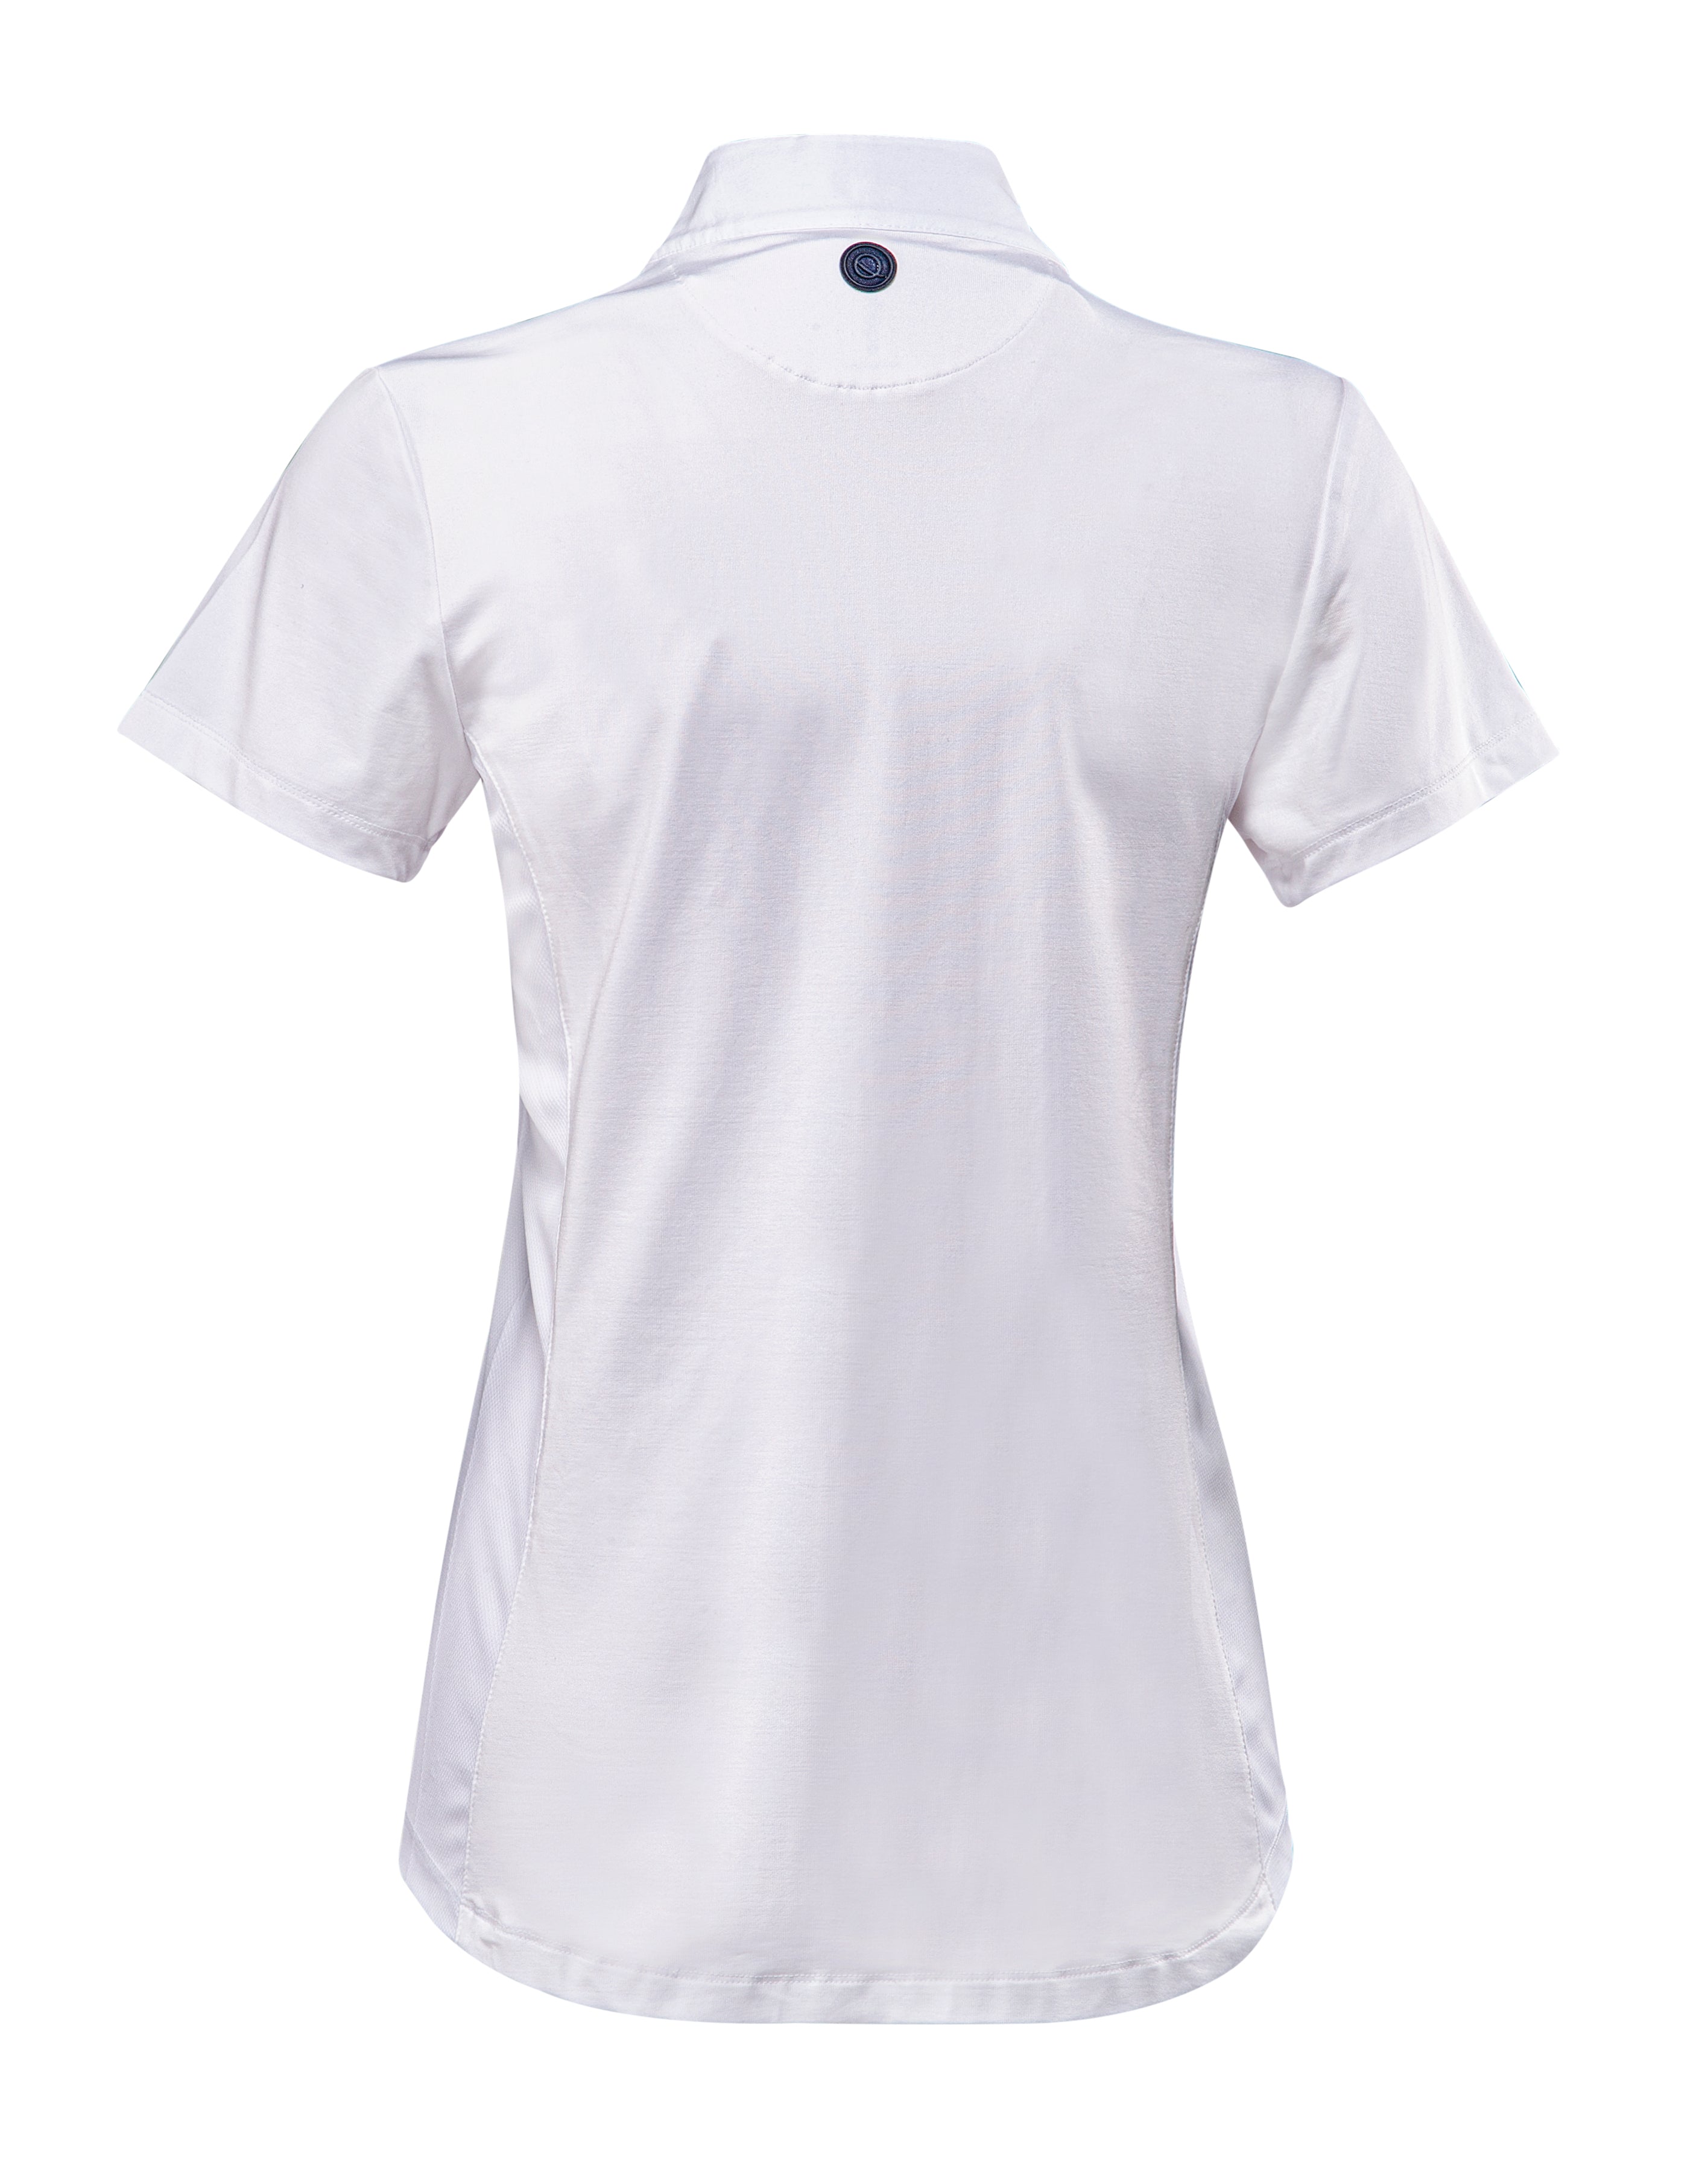 Eqode - Women's Competition Polo Shirt S/S